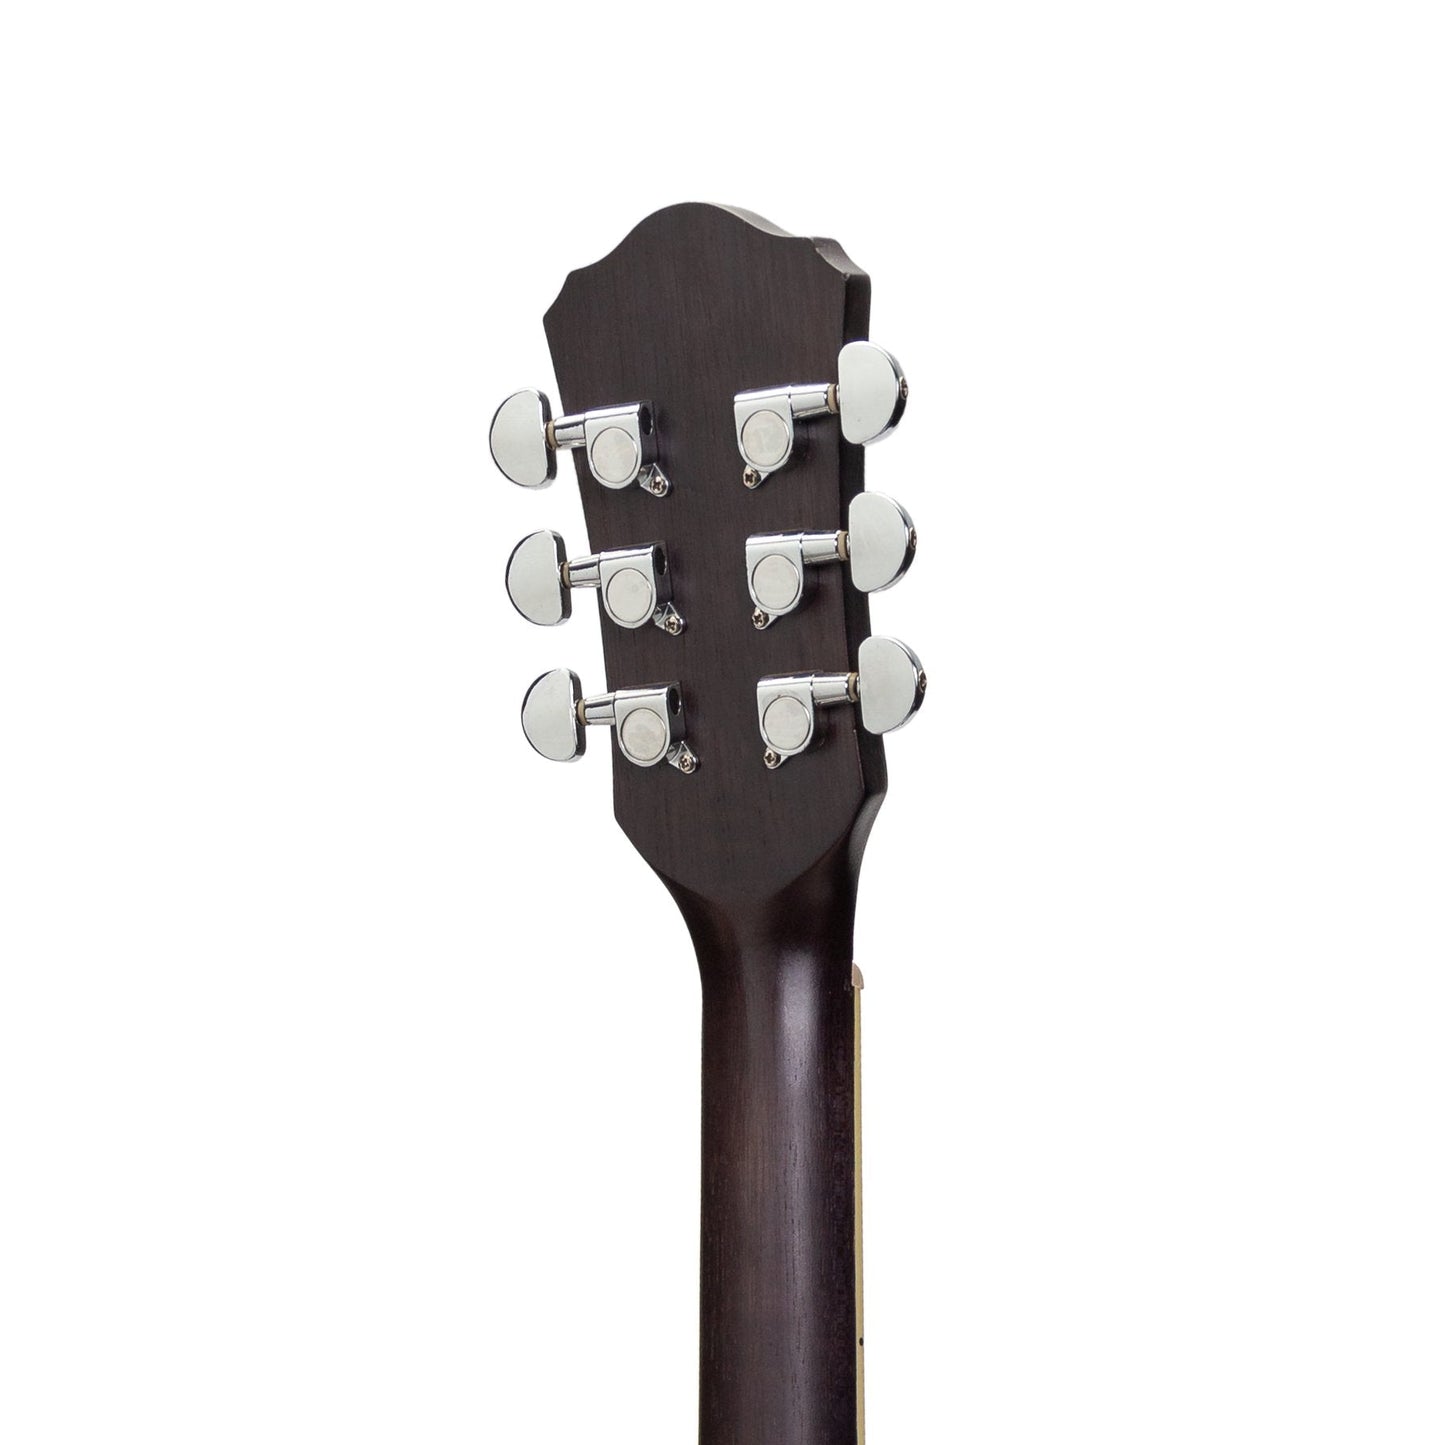 Load image into Gallery viewer, Martinez Jazz Hybrid Acoustic Small Body Cutaway Guitar (Black)
